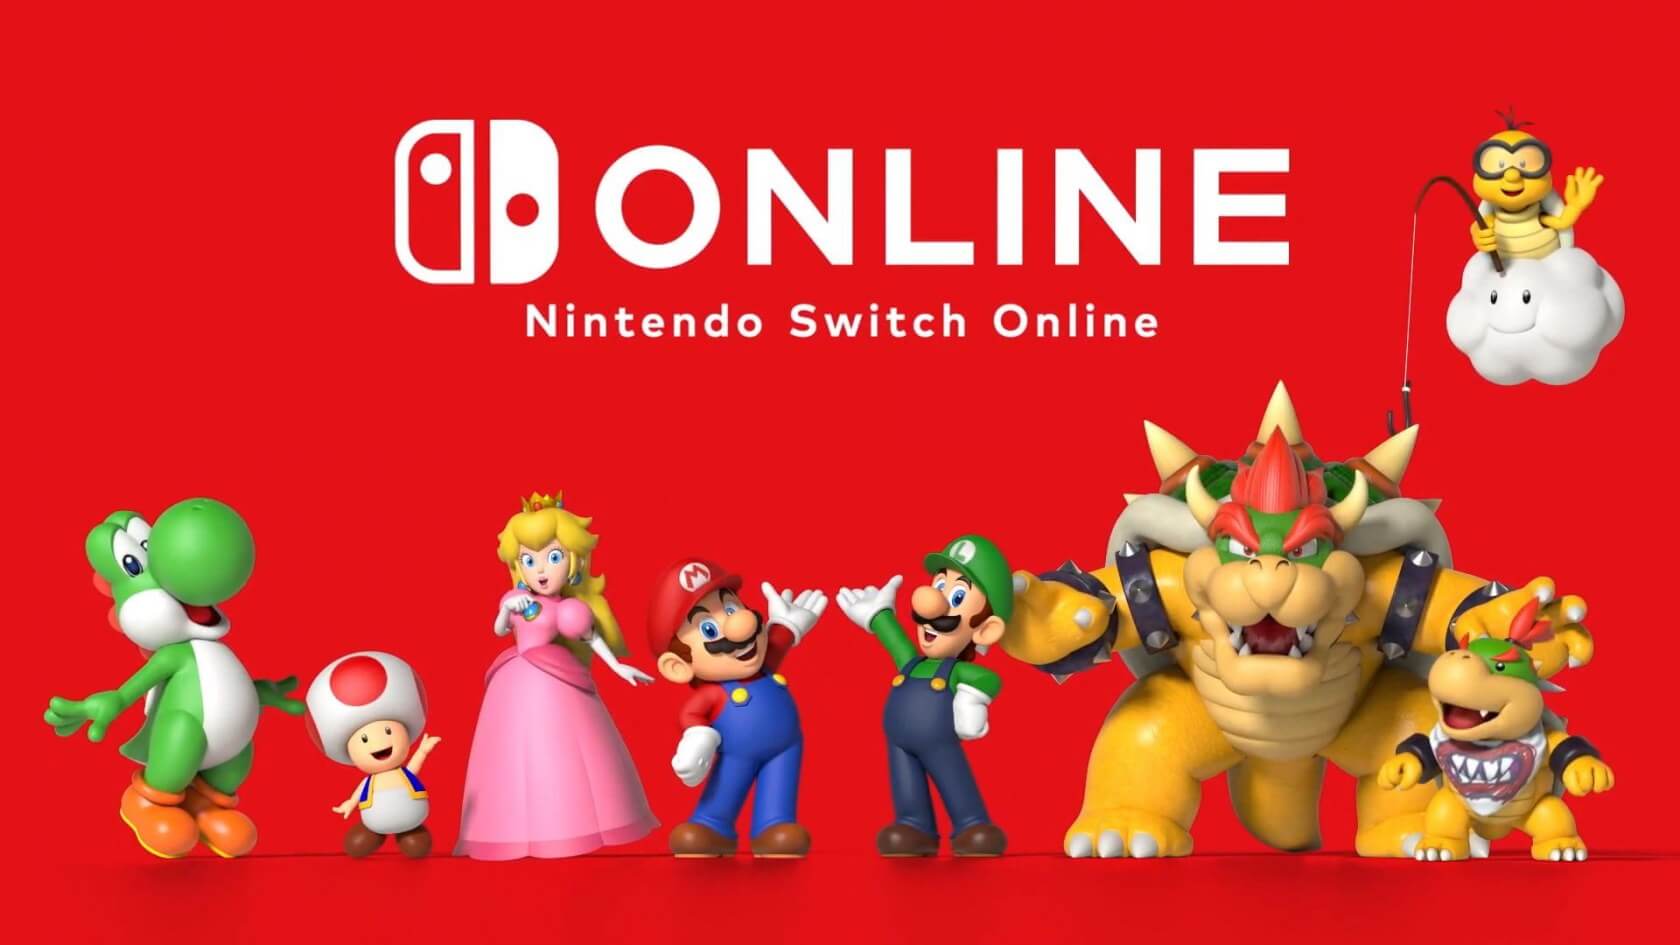 Nintendo confirms Gold Points can be used to purchase Switch Online subscriptions